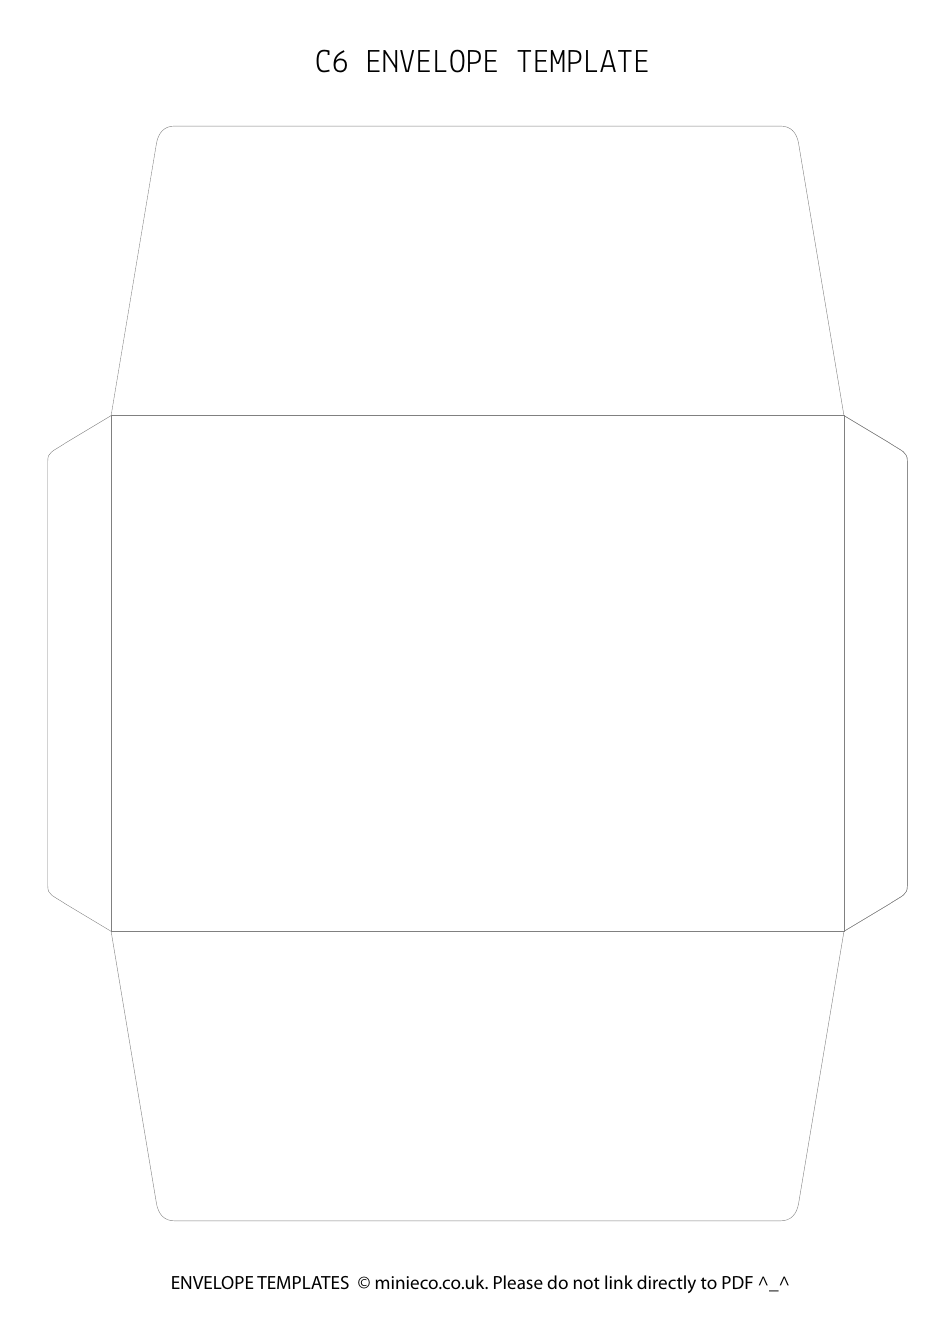 C6 envelope template - black and white